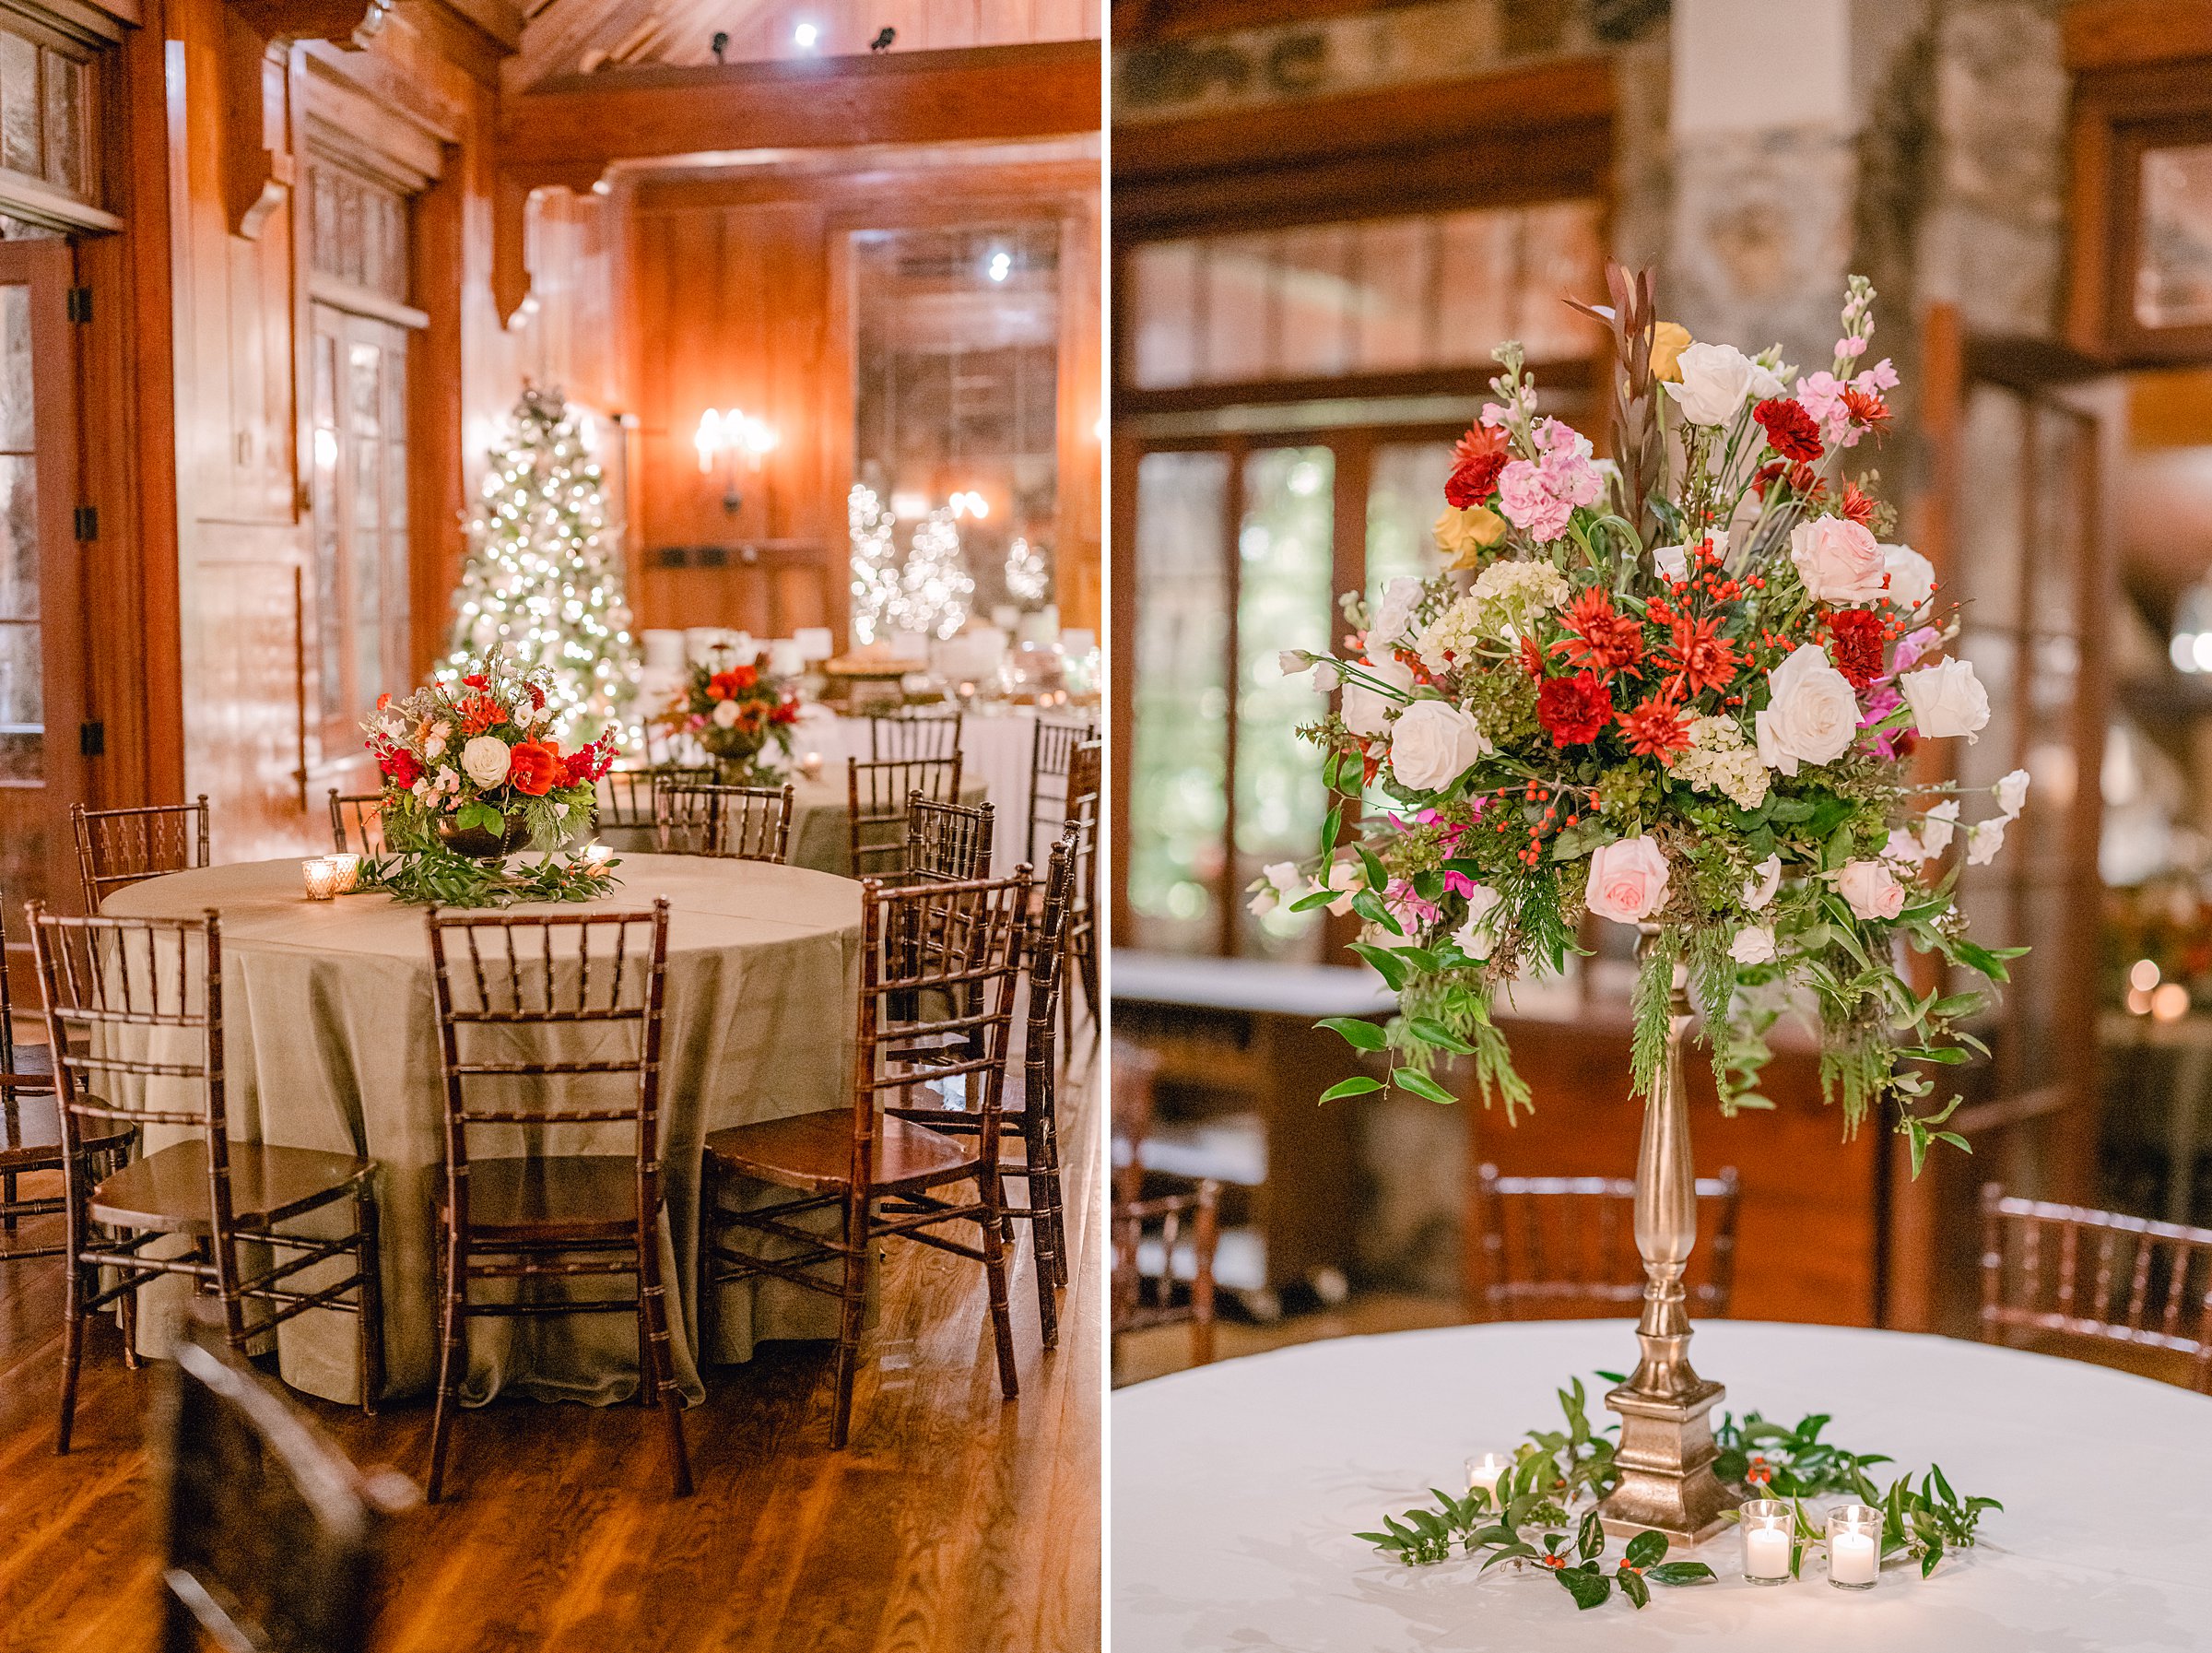 colorful winter wedding in columbus, ga - colorful floral arrangements in the big eddy club